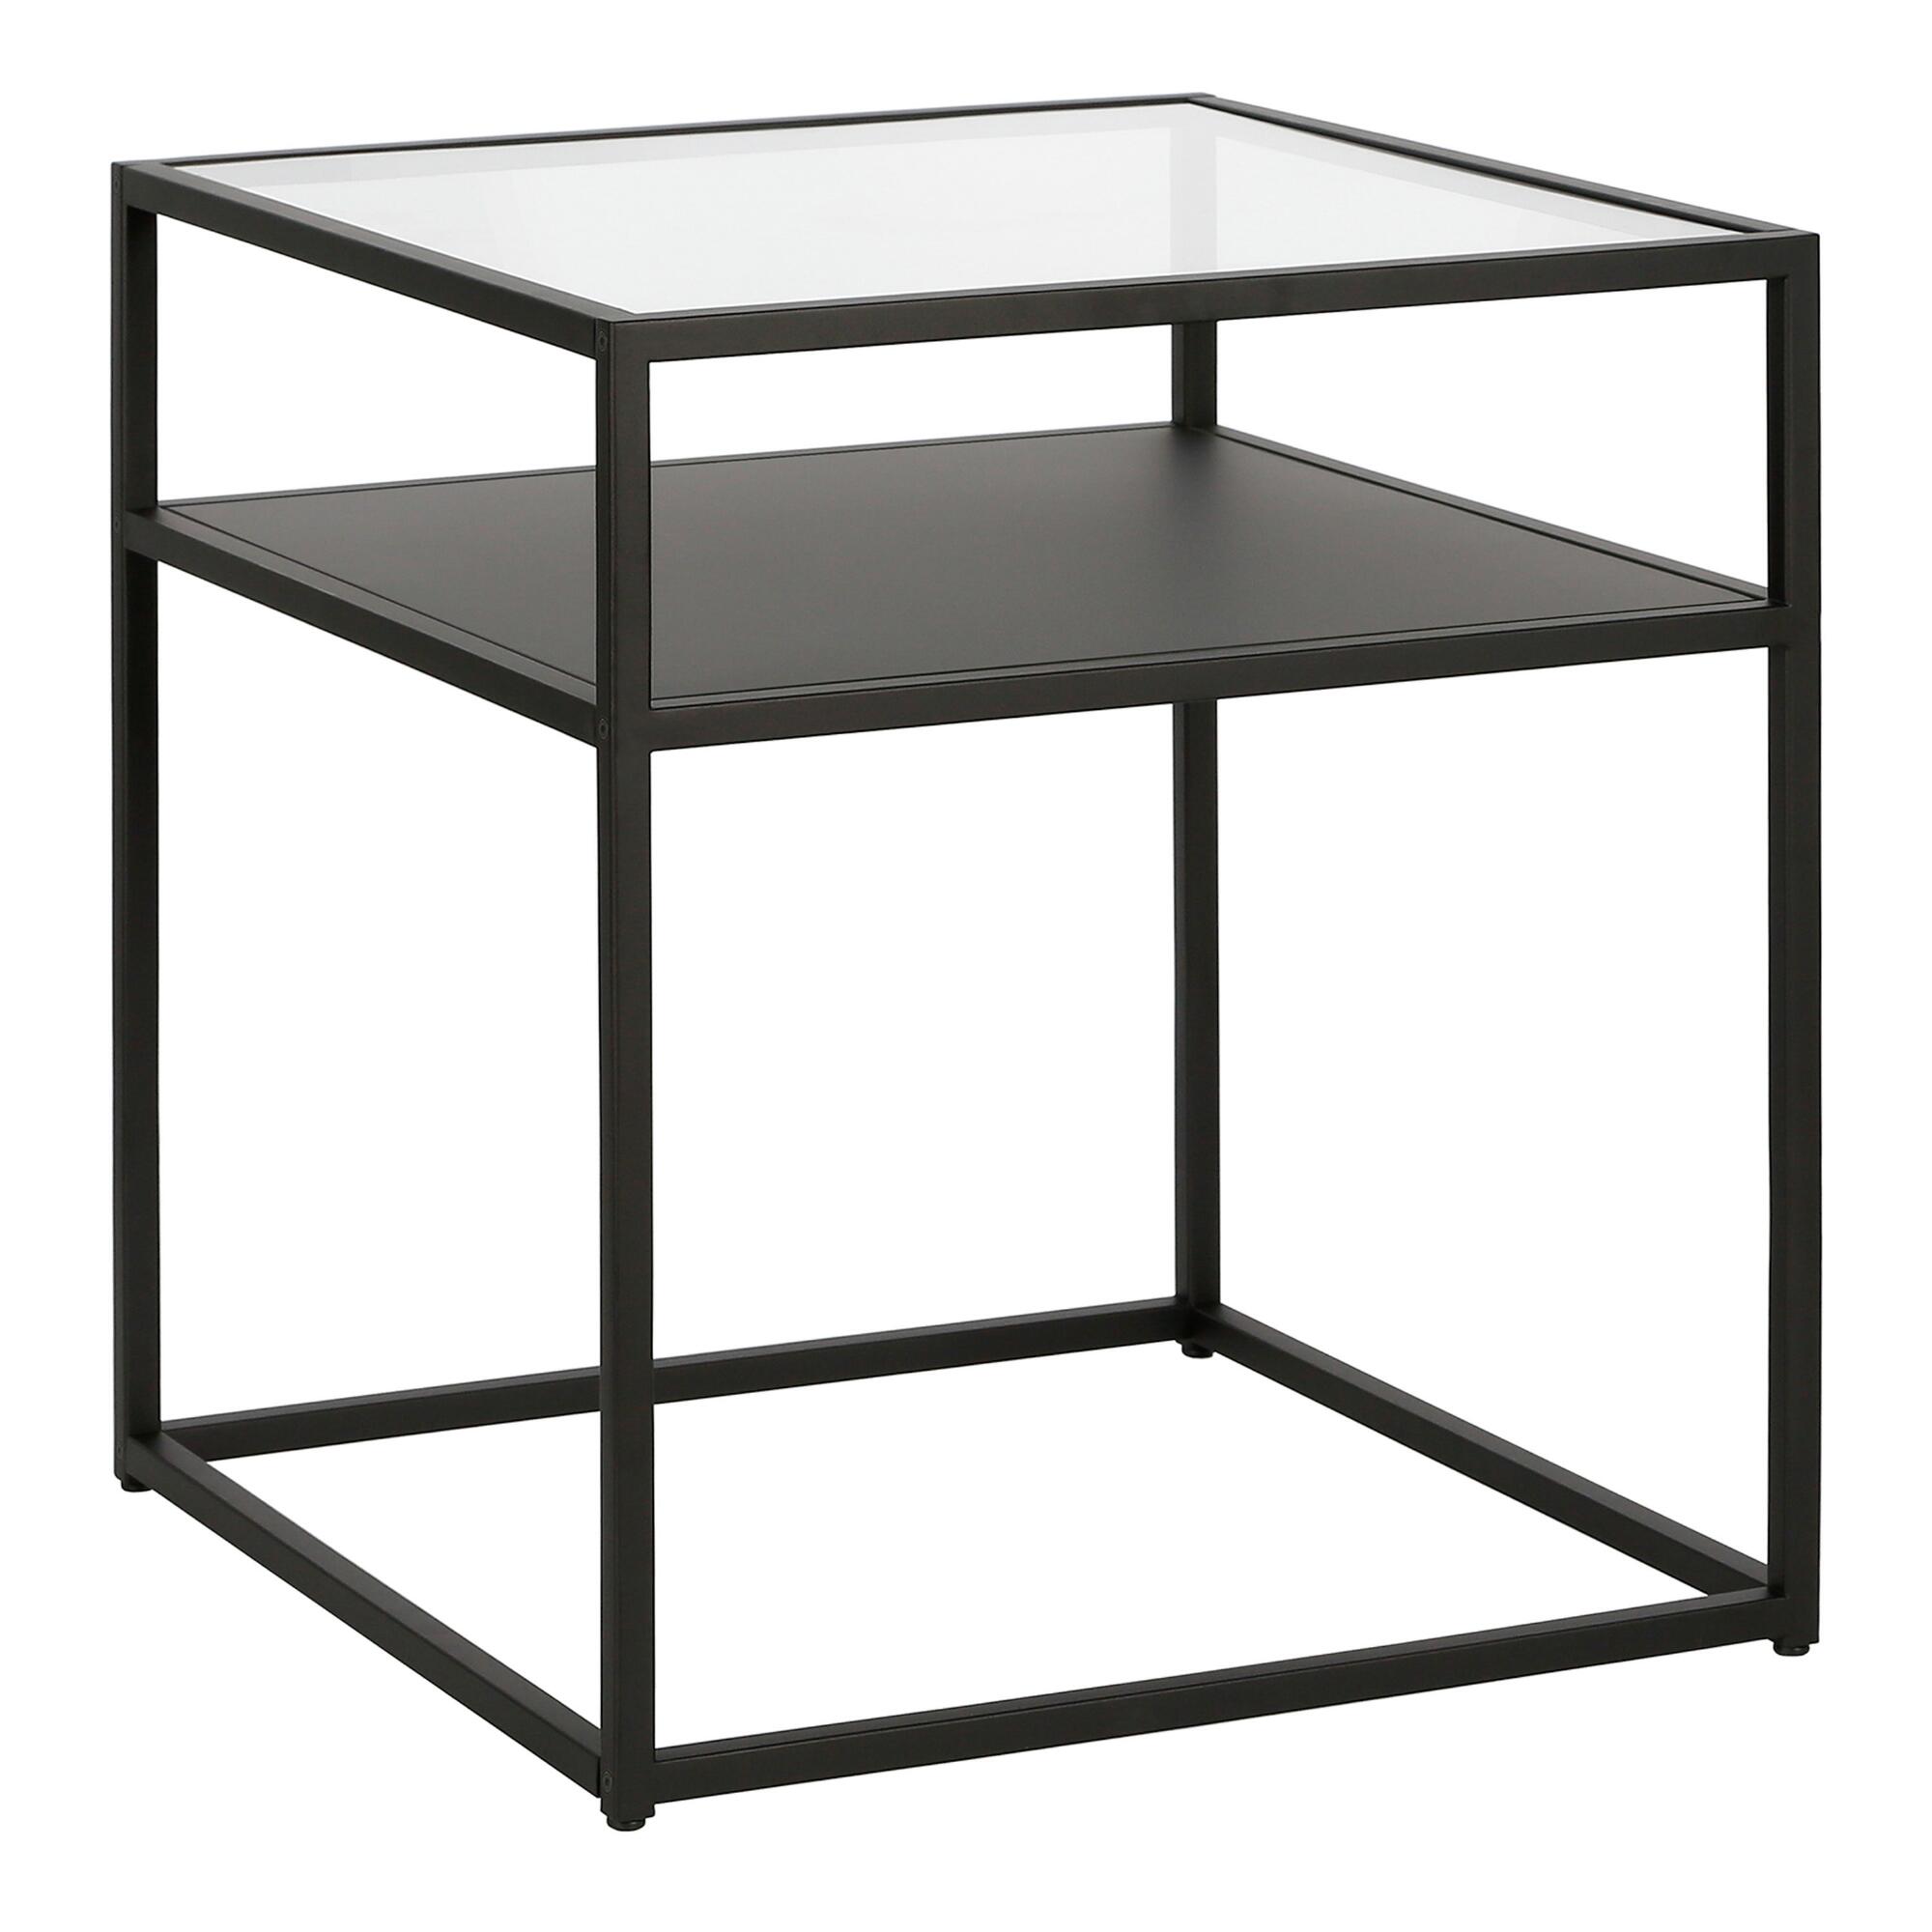 Square Black Metal and Glass Top Gia Accent Table with Shelf by World Market